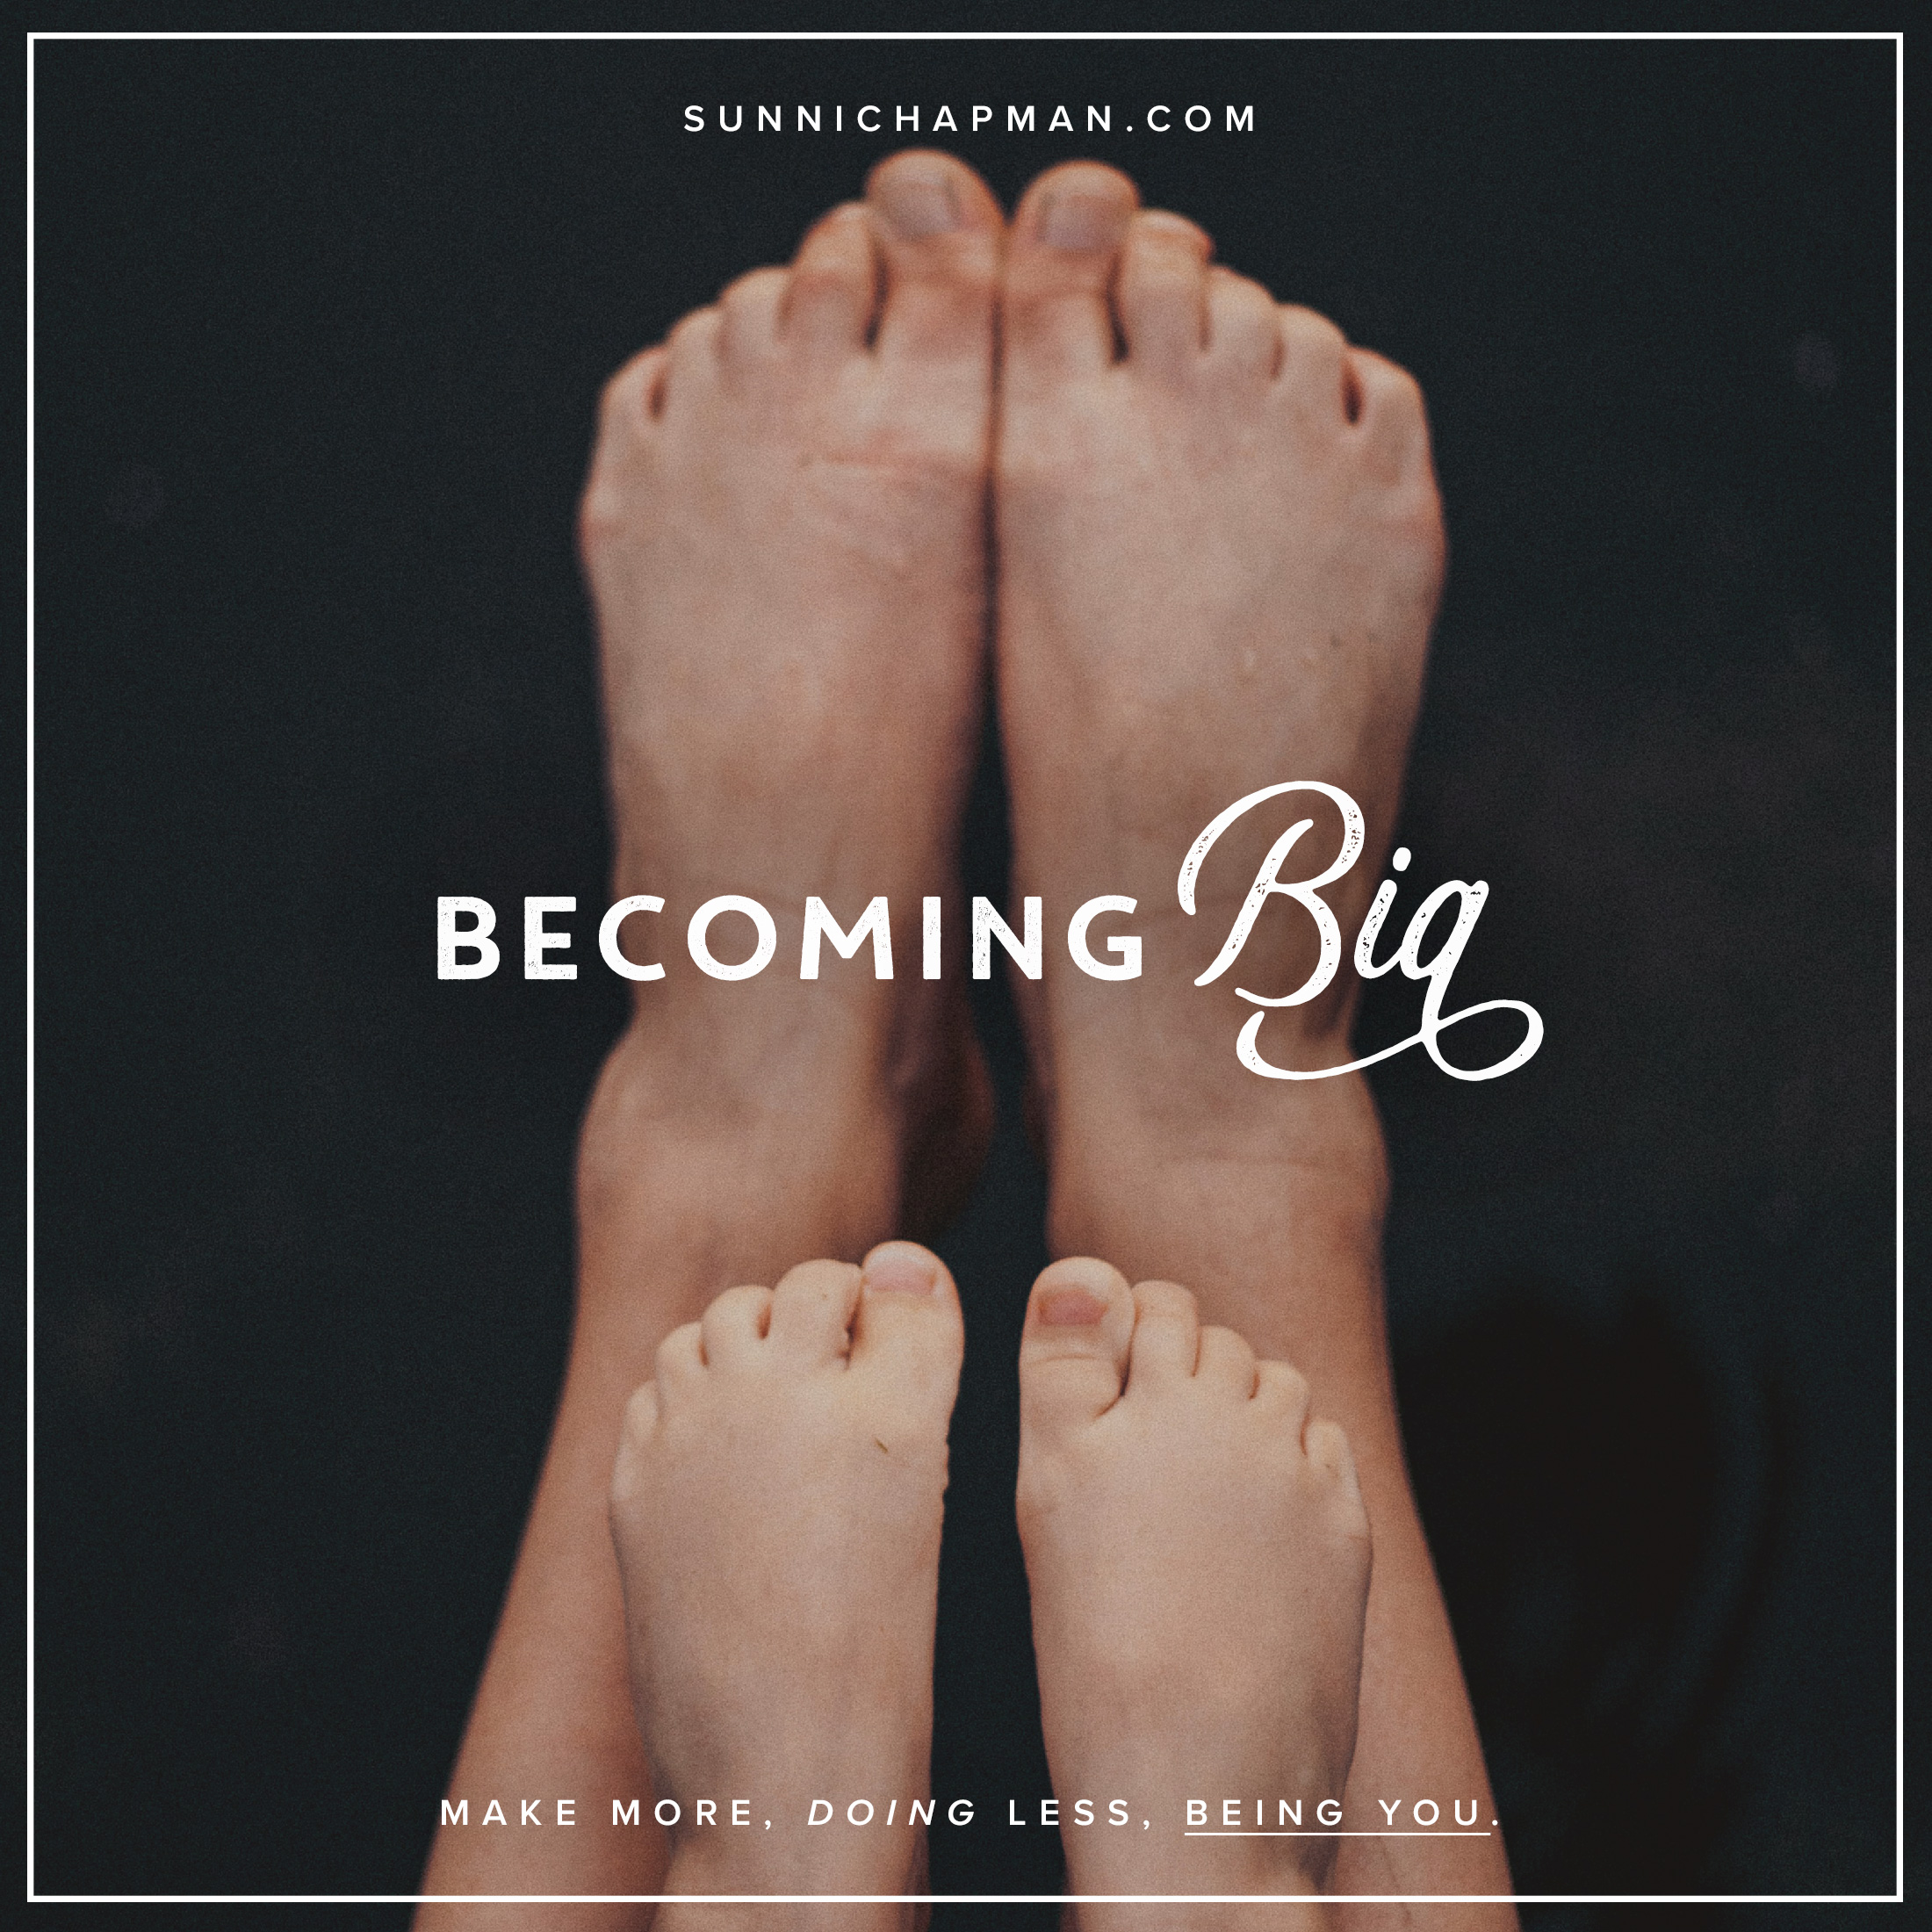 The image shows the lower legs and feet of two individuals with the larger feet at the back and smaller feet in front, likely suggesting an adult and a child standing with their feet close to each other. The background is dark, and the feet and legs are the central focus of the image. There is text overlaying the image that reads "BECOMING BIG" along with a website address "SUNNICHAPMAN.COM" at the top and a slogan "MAKE MORE, DOING LESS, BEING YOU." at the bottom. This image appears to be a promotional or inspirational graphic, possibly for a personal development program, blog, or book related to personal growth and self-improvement.